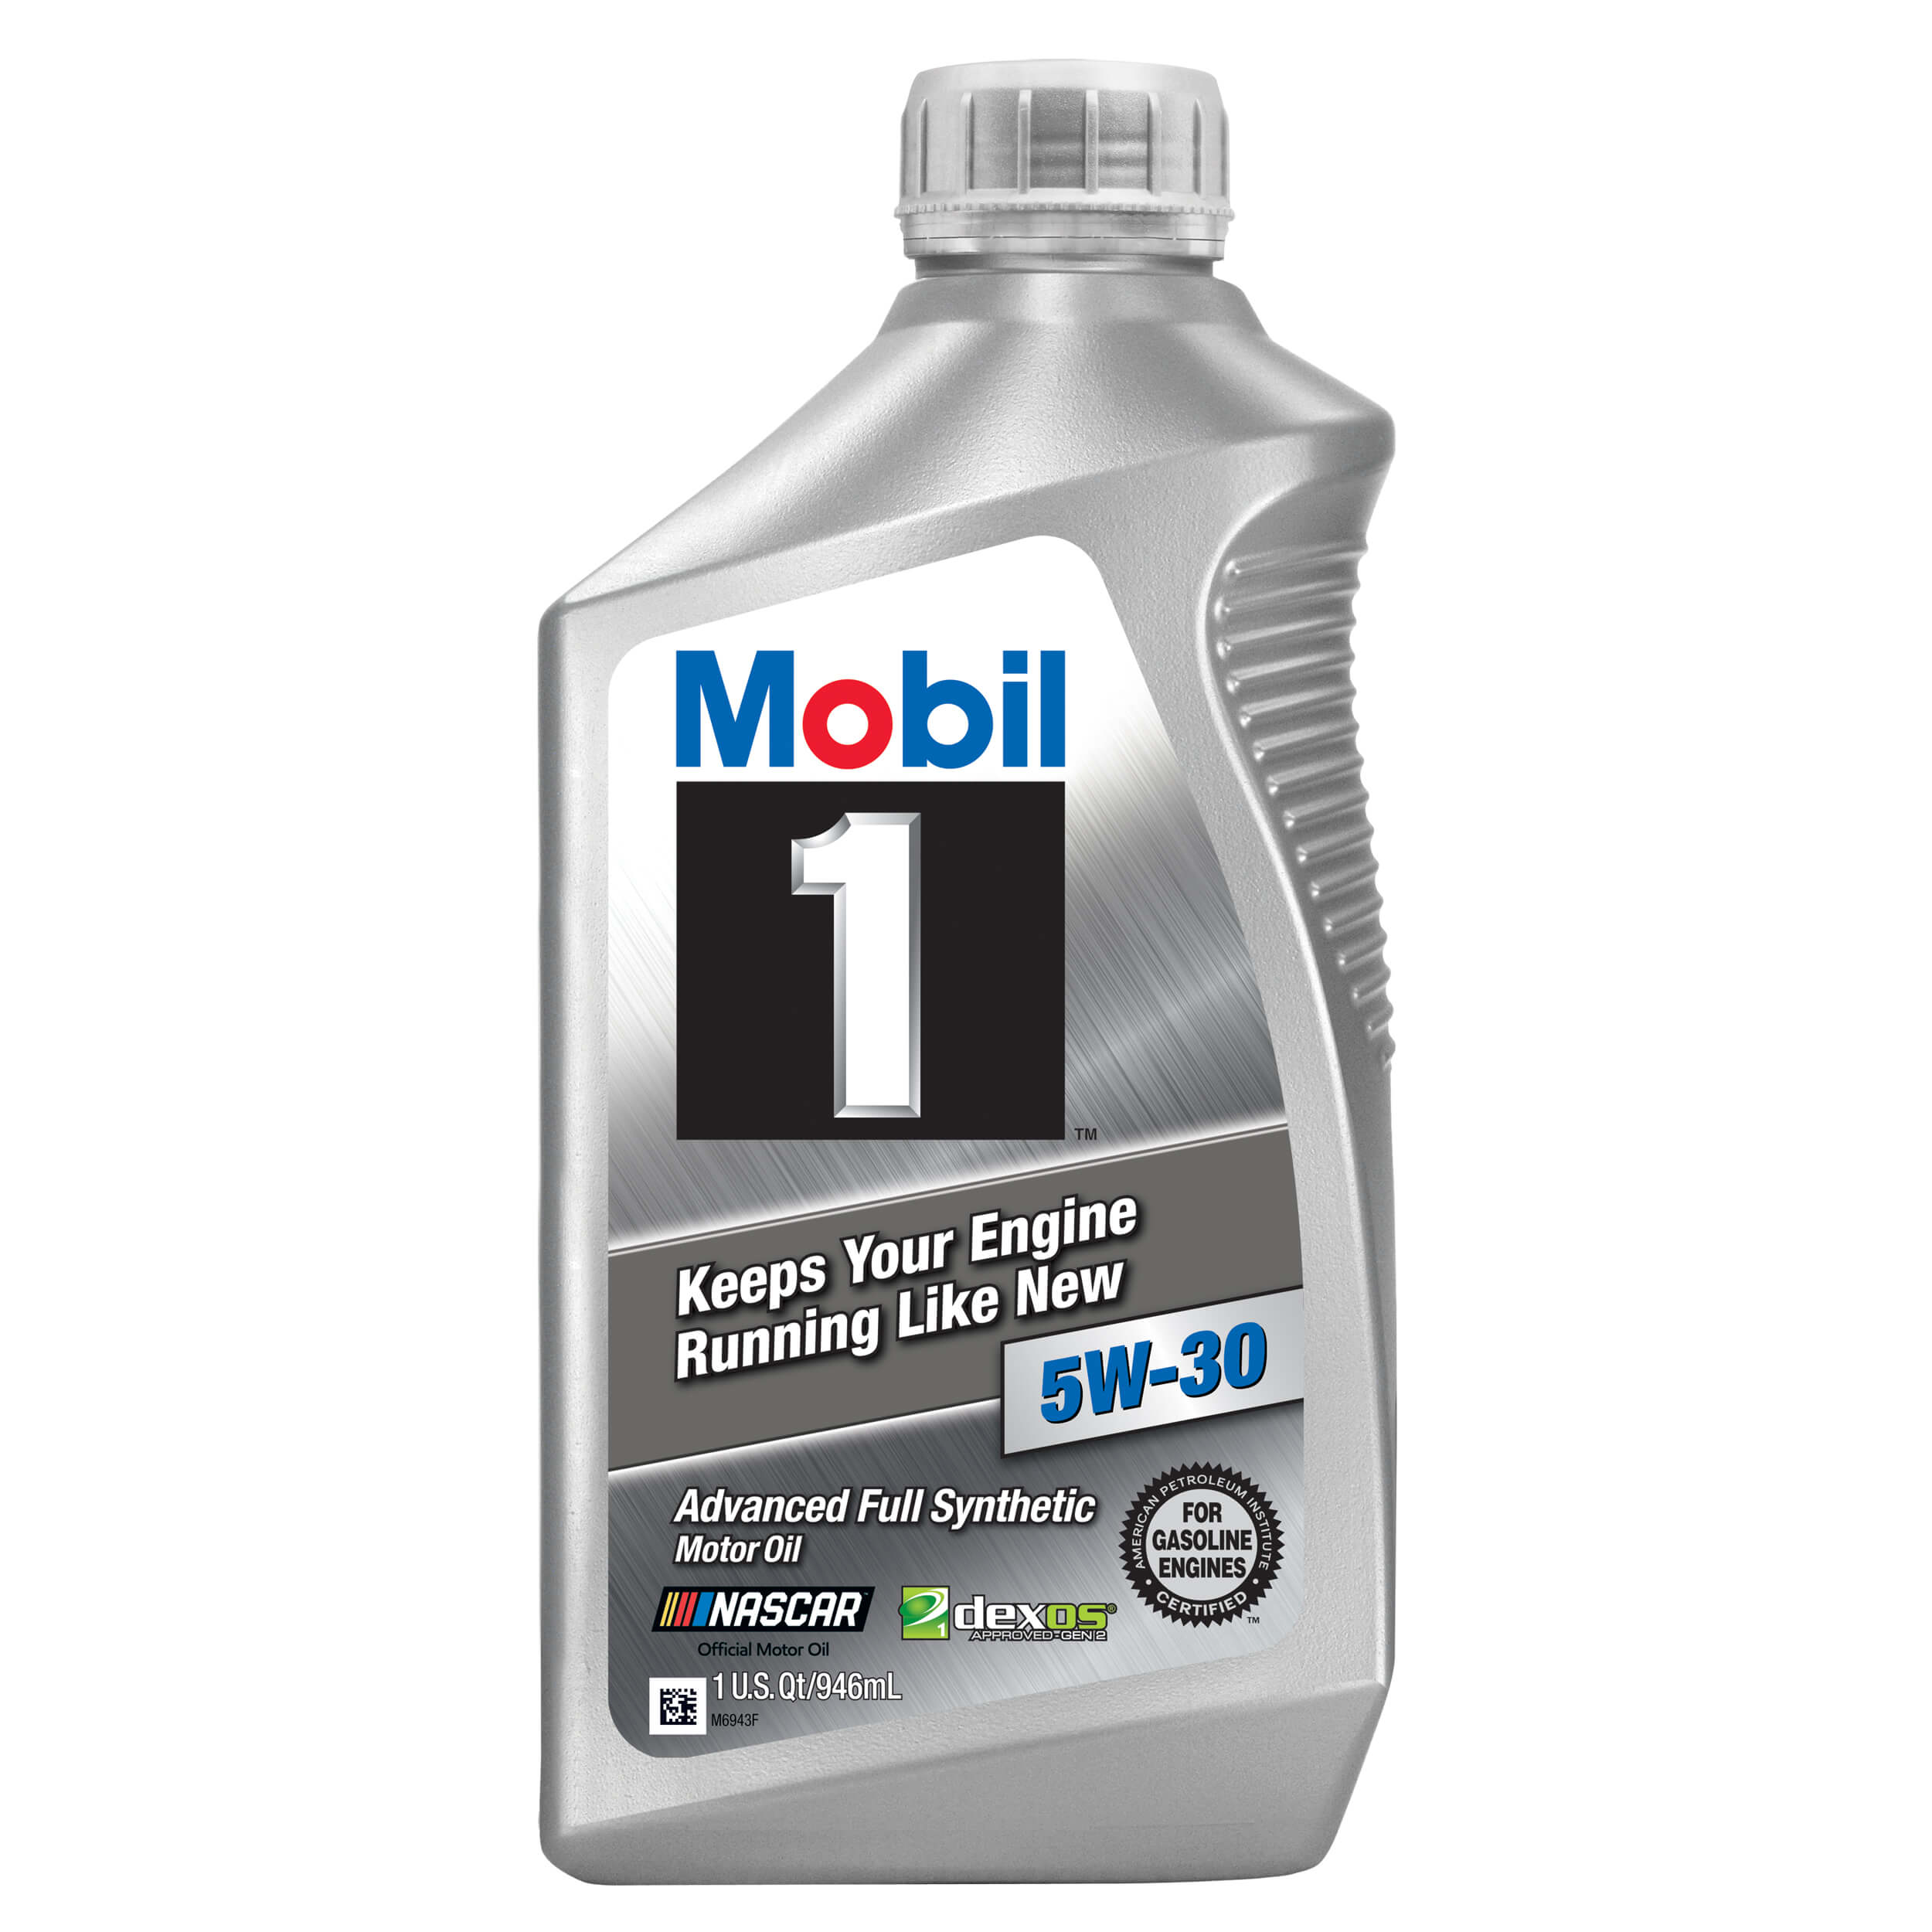 Mobil 1 5W-30 Full Synthetic Engine Oil